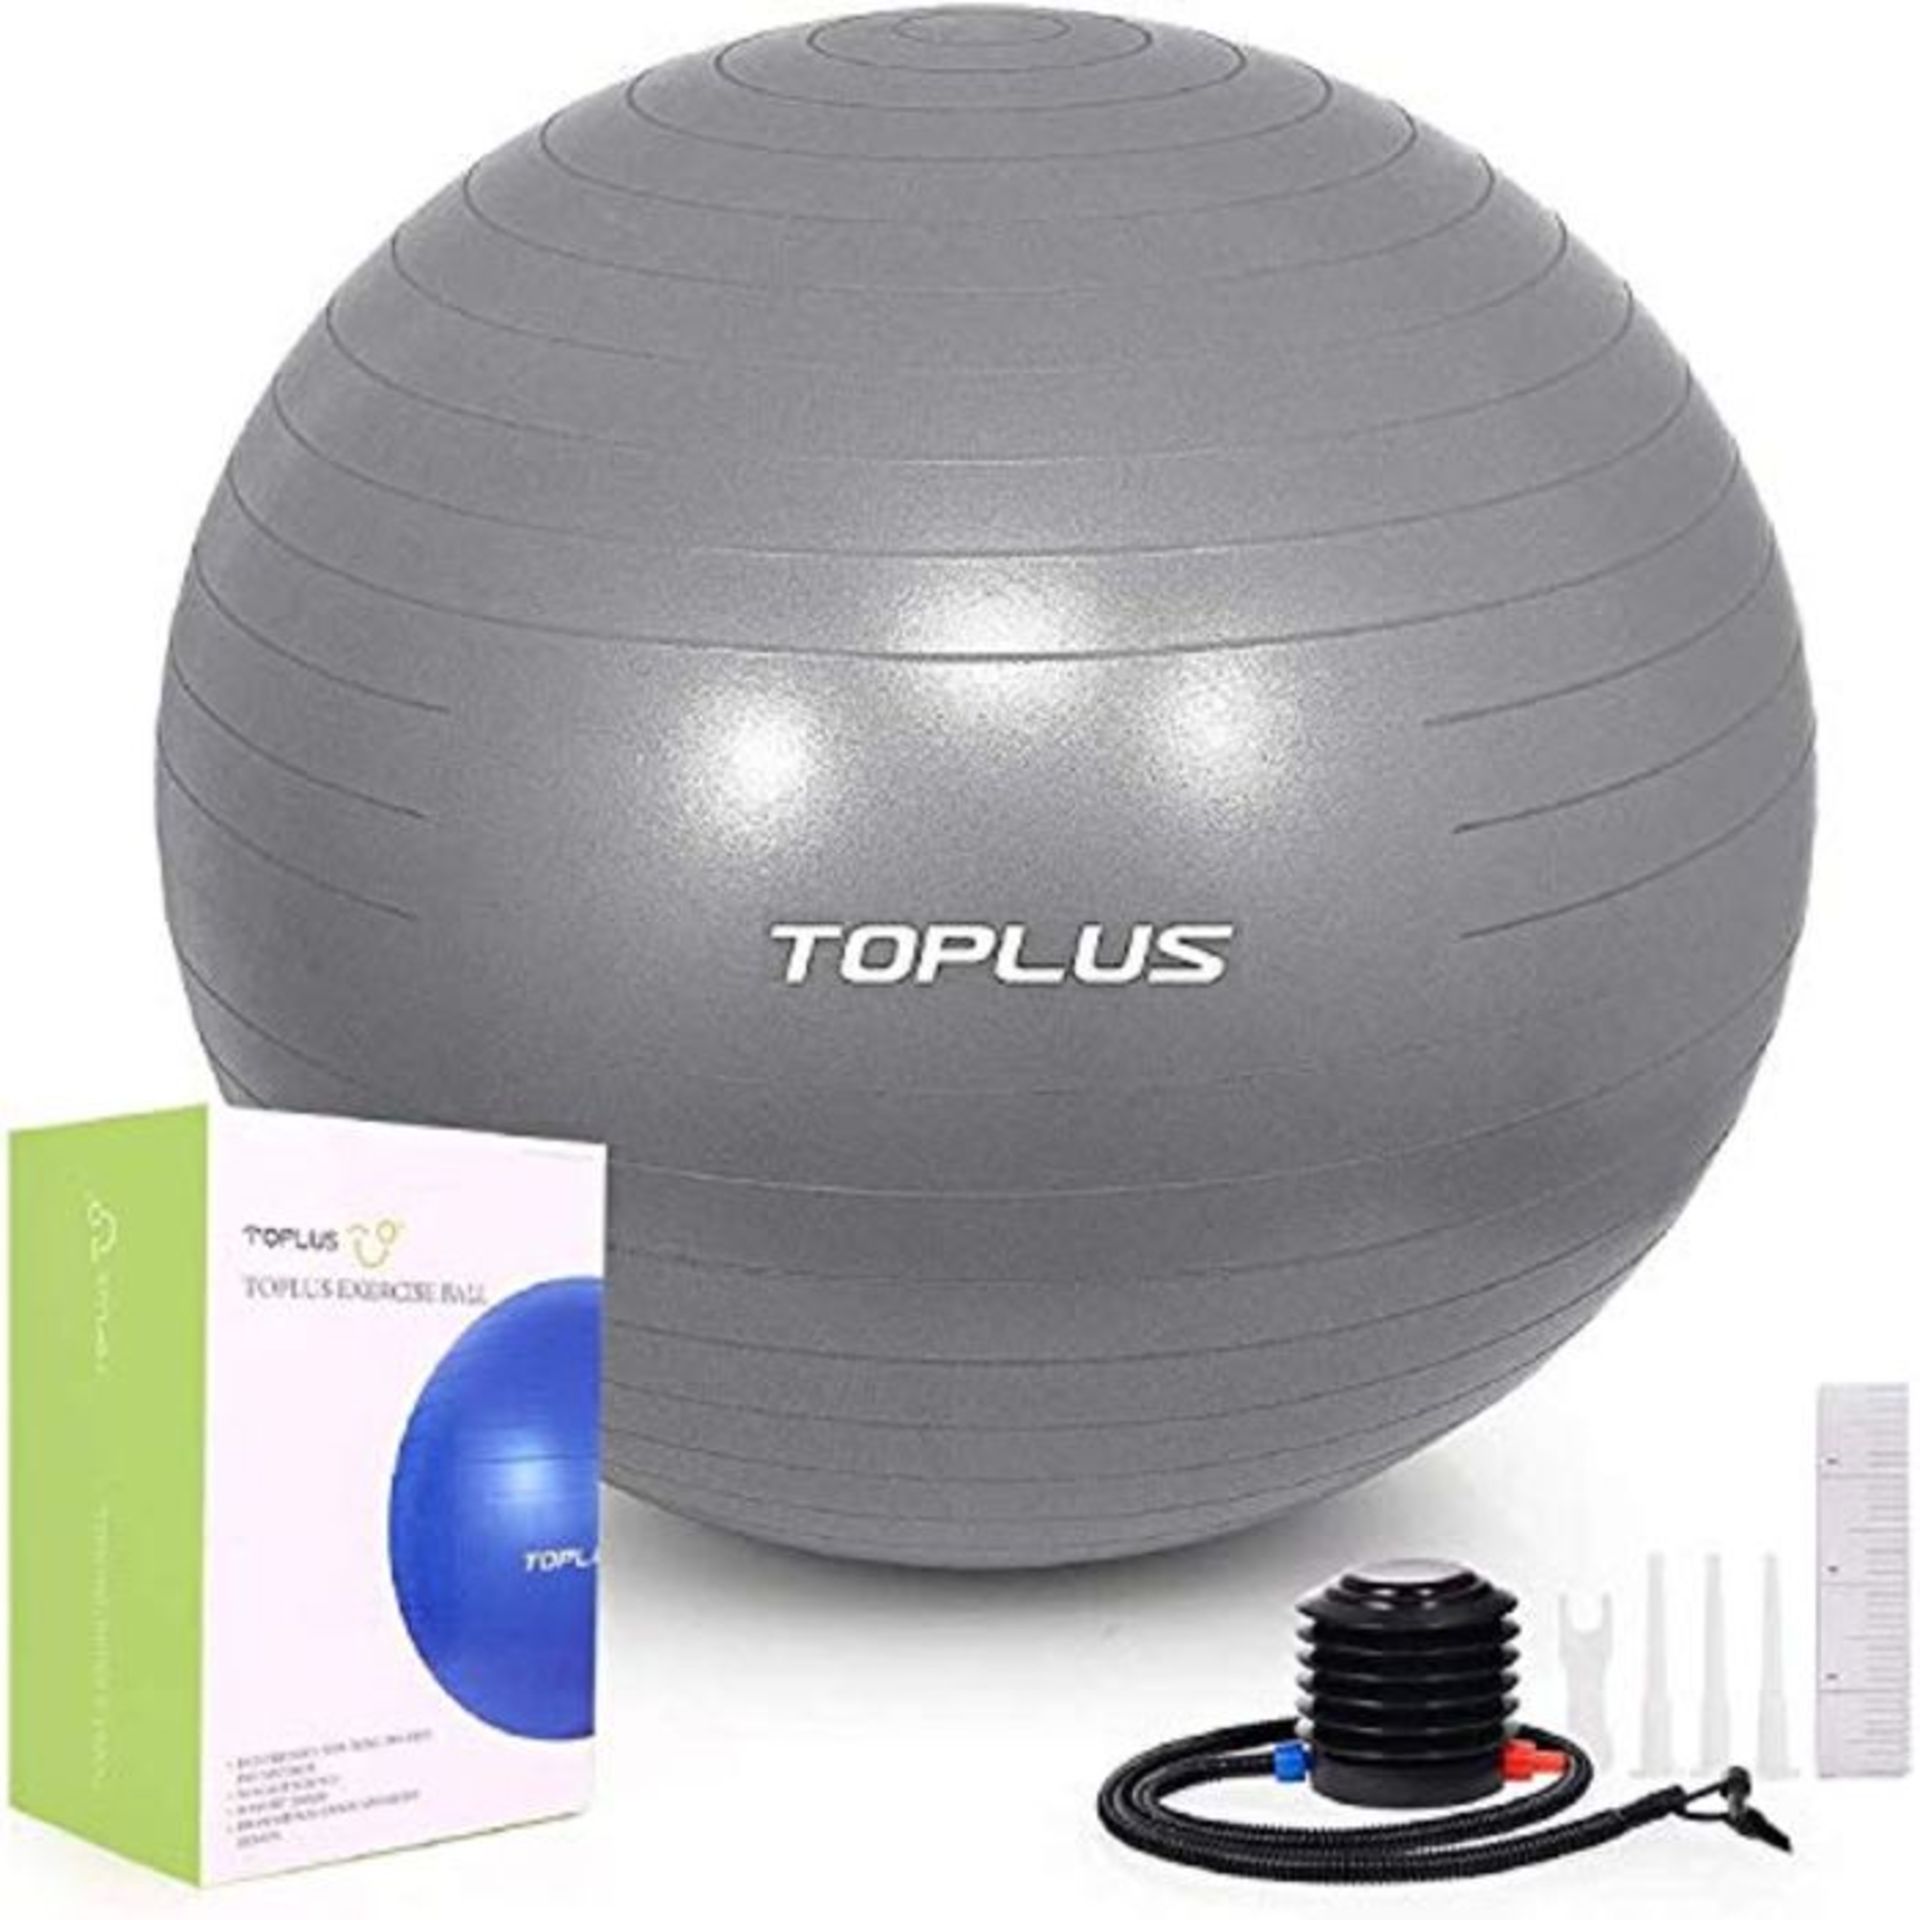 TOPLUS Exercise Ball Extra Thick Yoga Ball Chair, Anti-Berst Stability Ball for Heavy